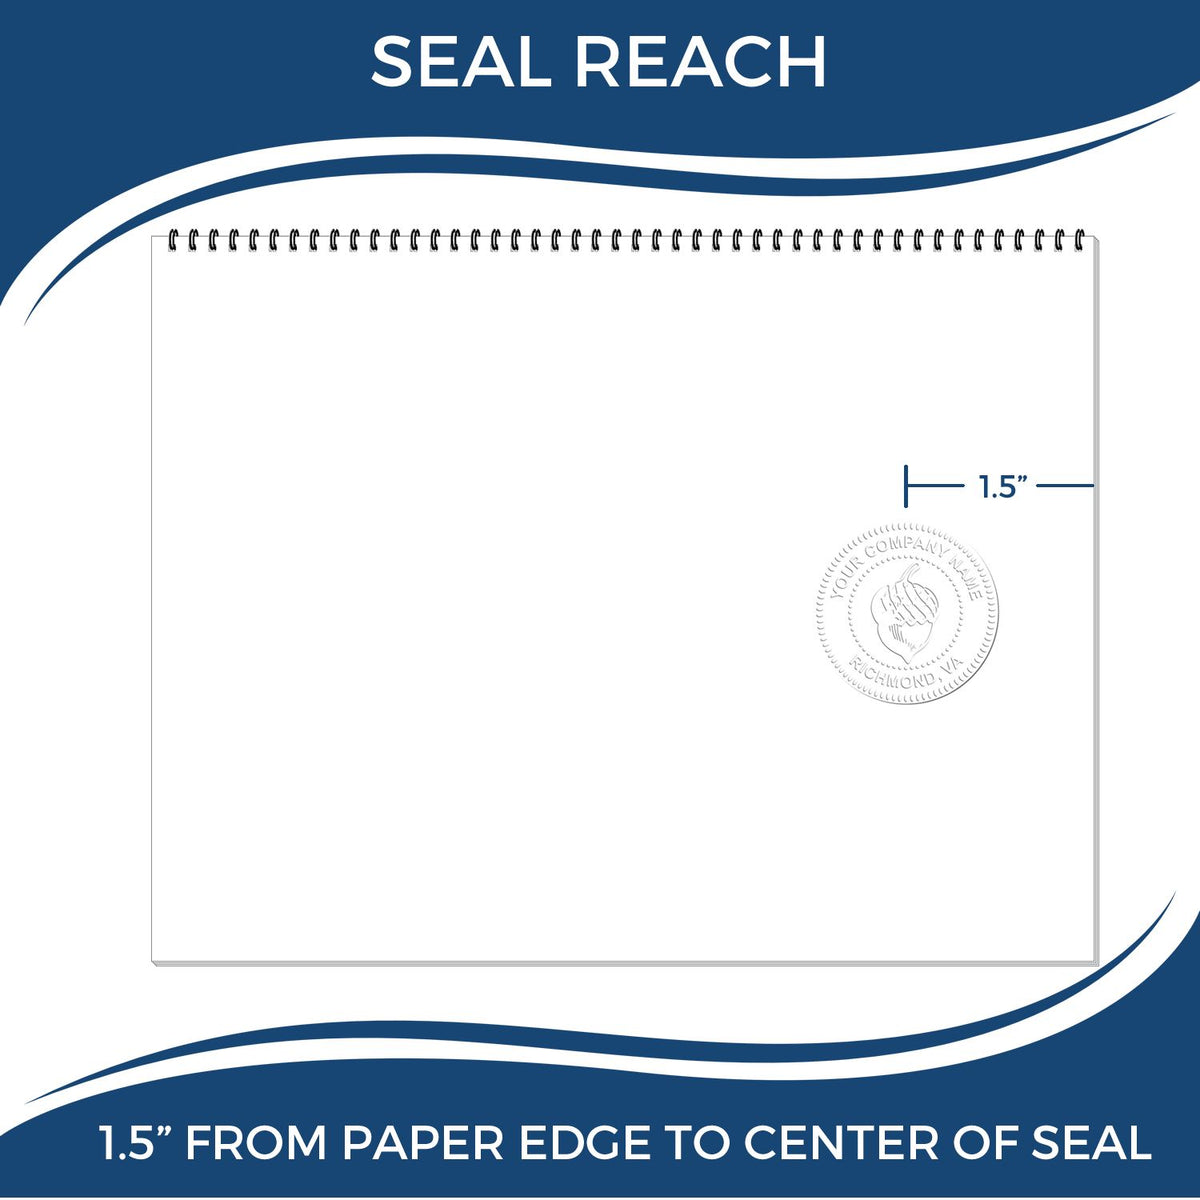 An infographic showing the seal reach which is represented by a ruler and a miniature seal image of the Hybrid Iowa Engineer Seal